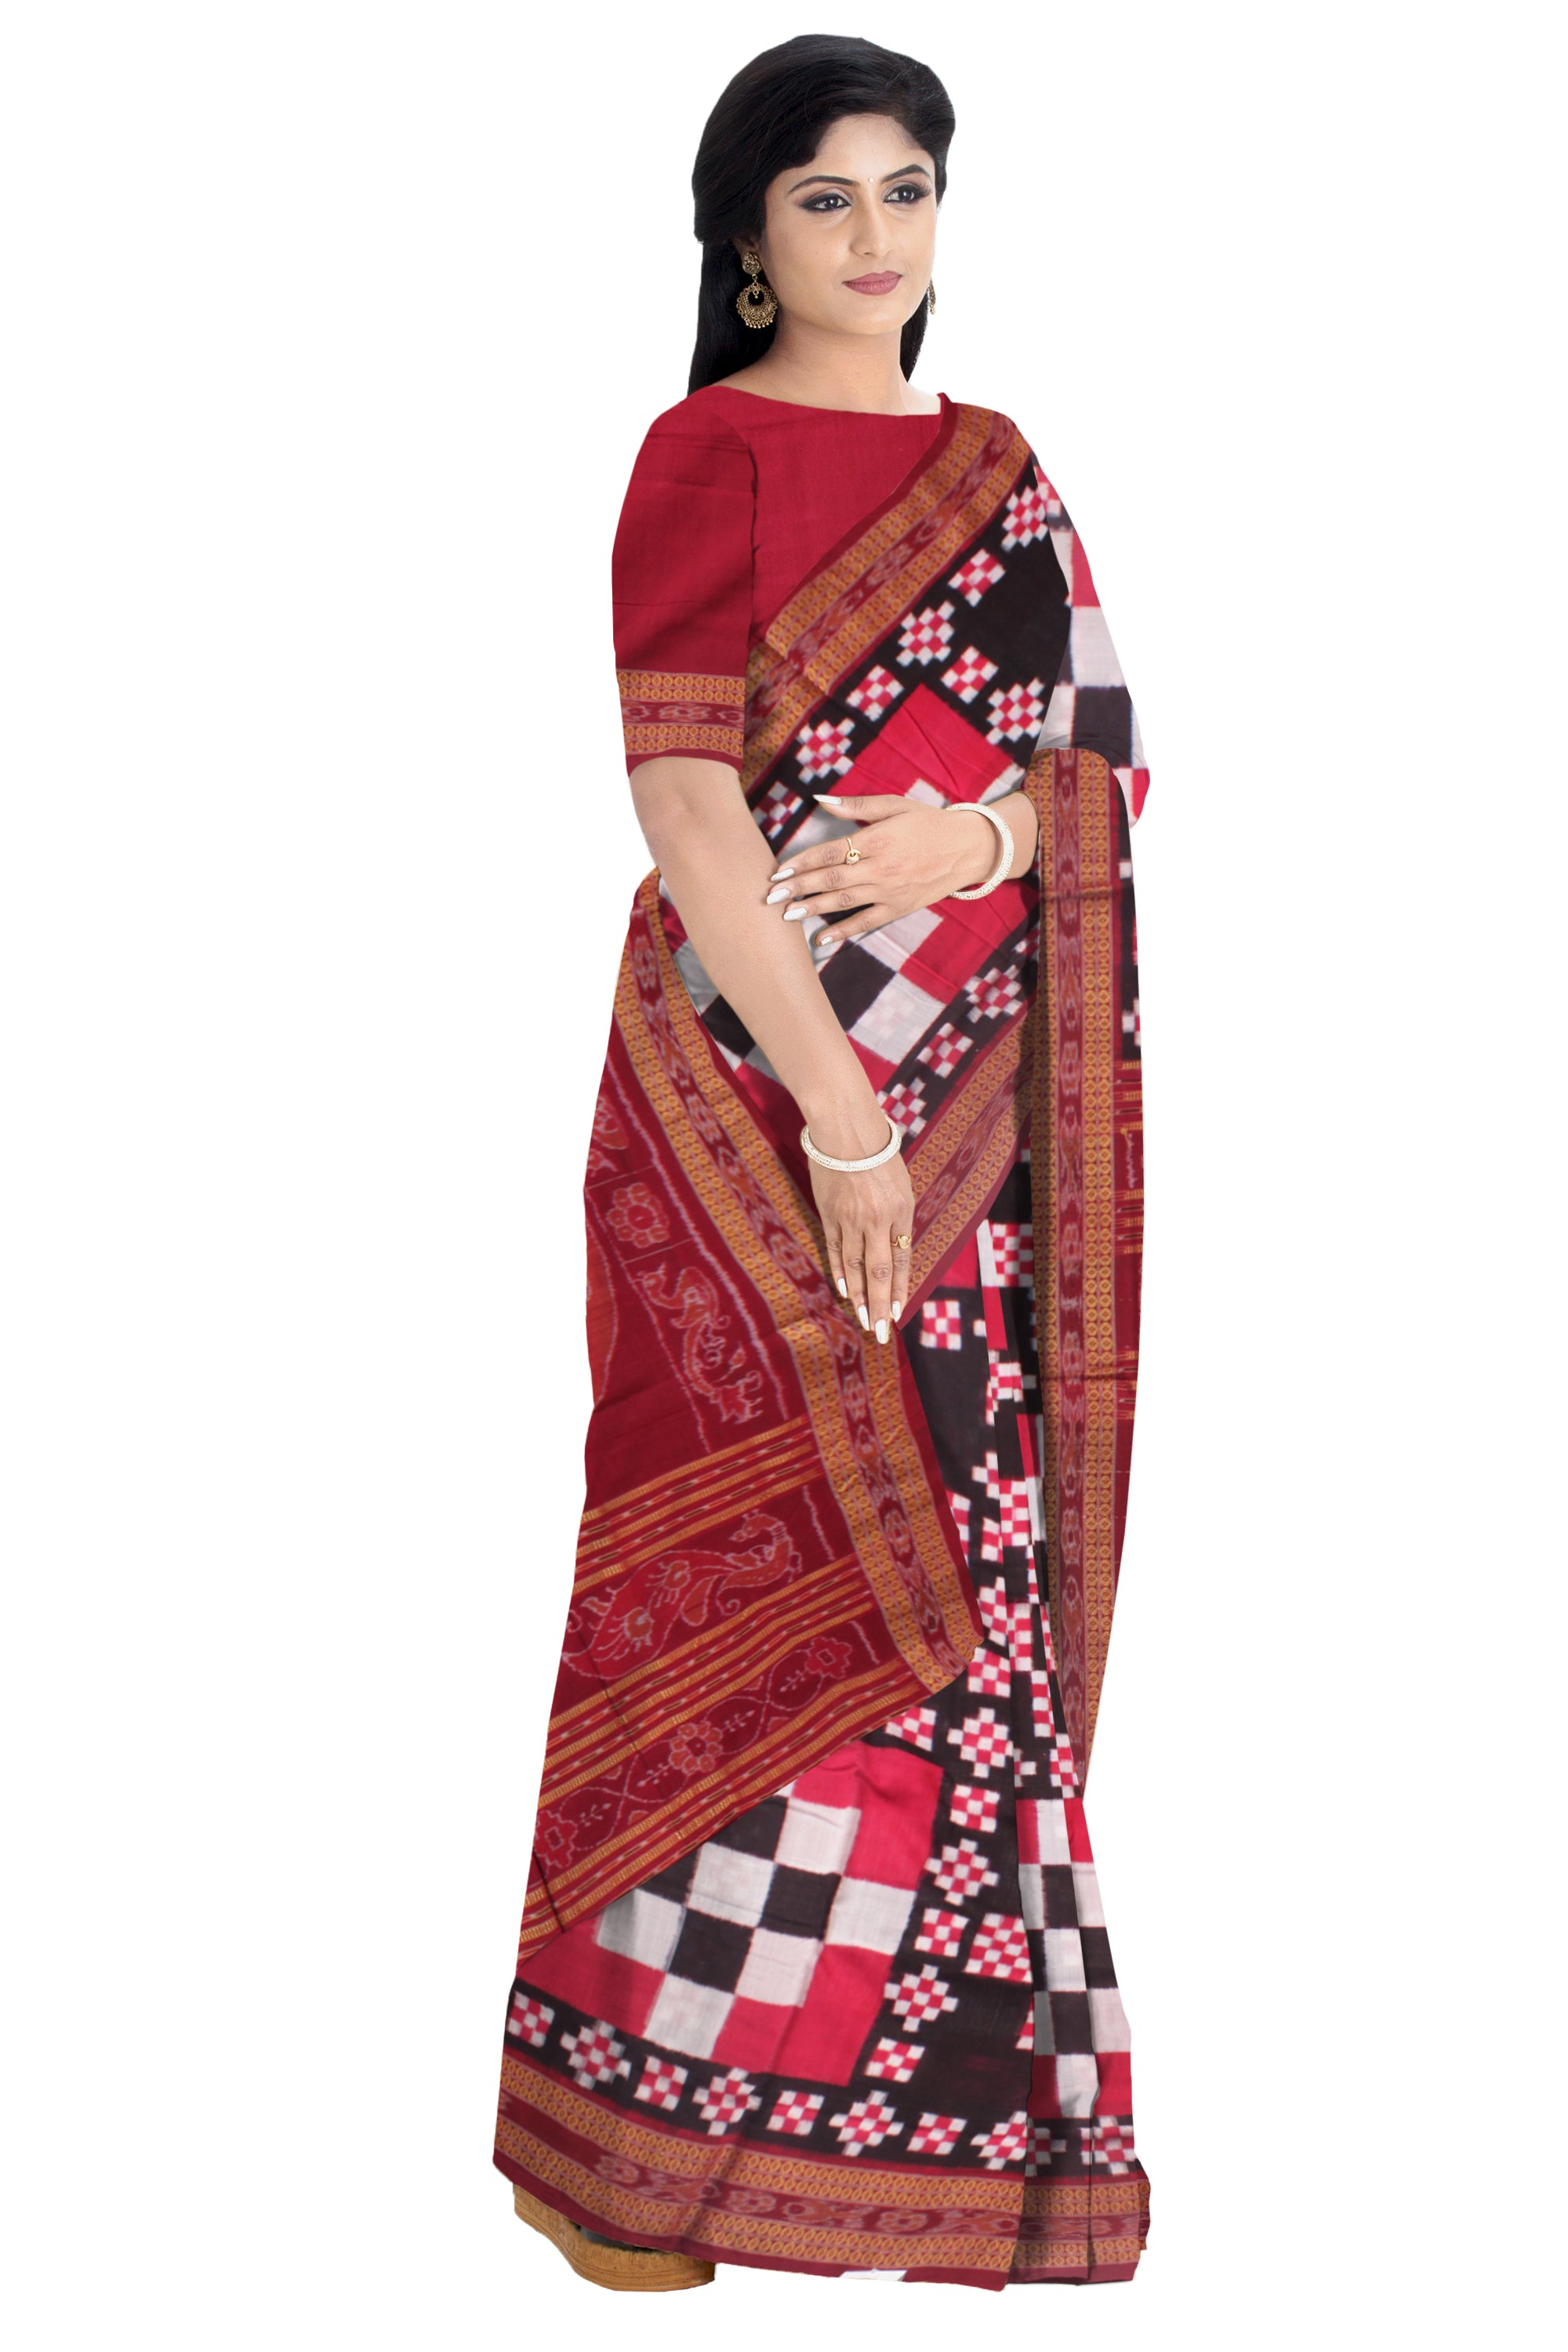 BIG PASAPALI PATTERN PURE COTTON SAREE IS RED AND BLACK COLOR, WITH BLOUSE PIECE. - Koshali Arts & Crafts Enterprise